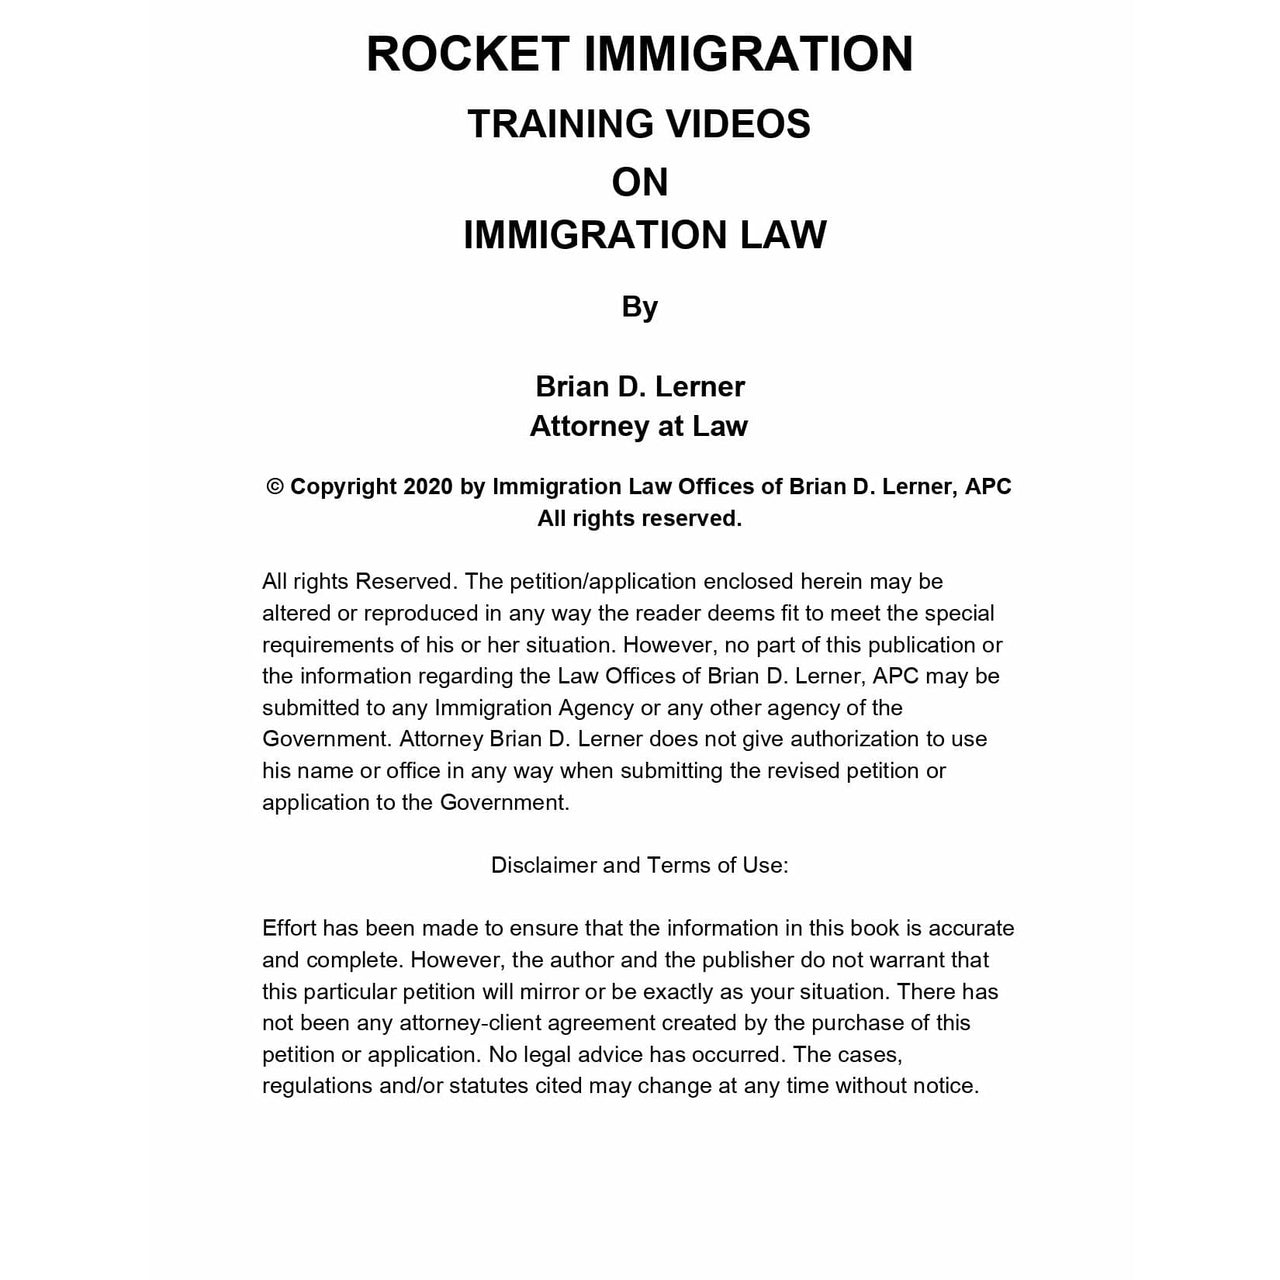 Investment Visas Training Course Access Packet - Rocket Immigration Petitions